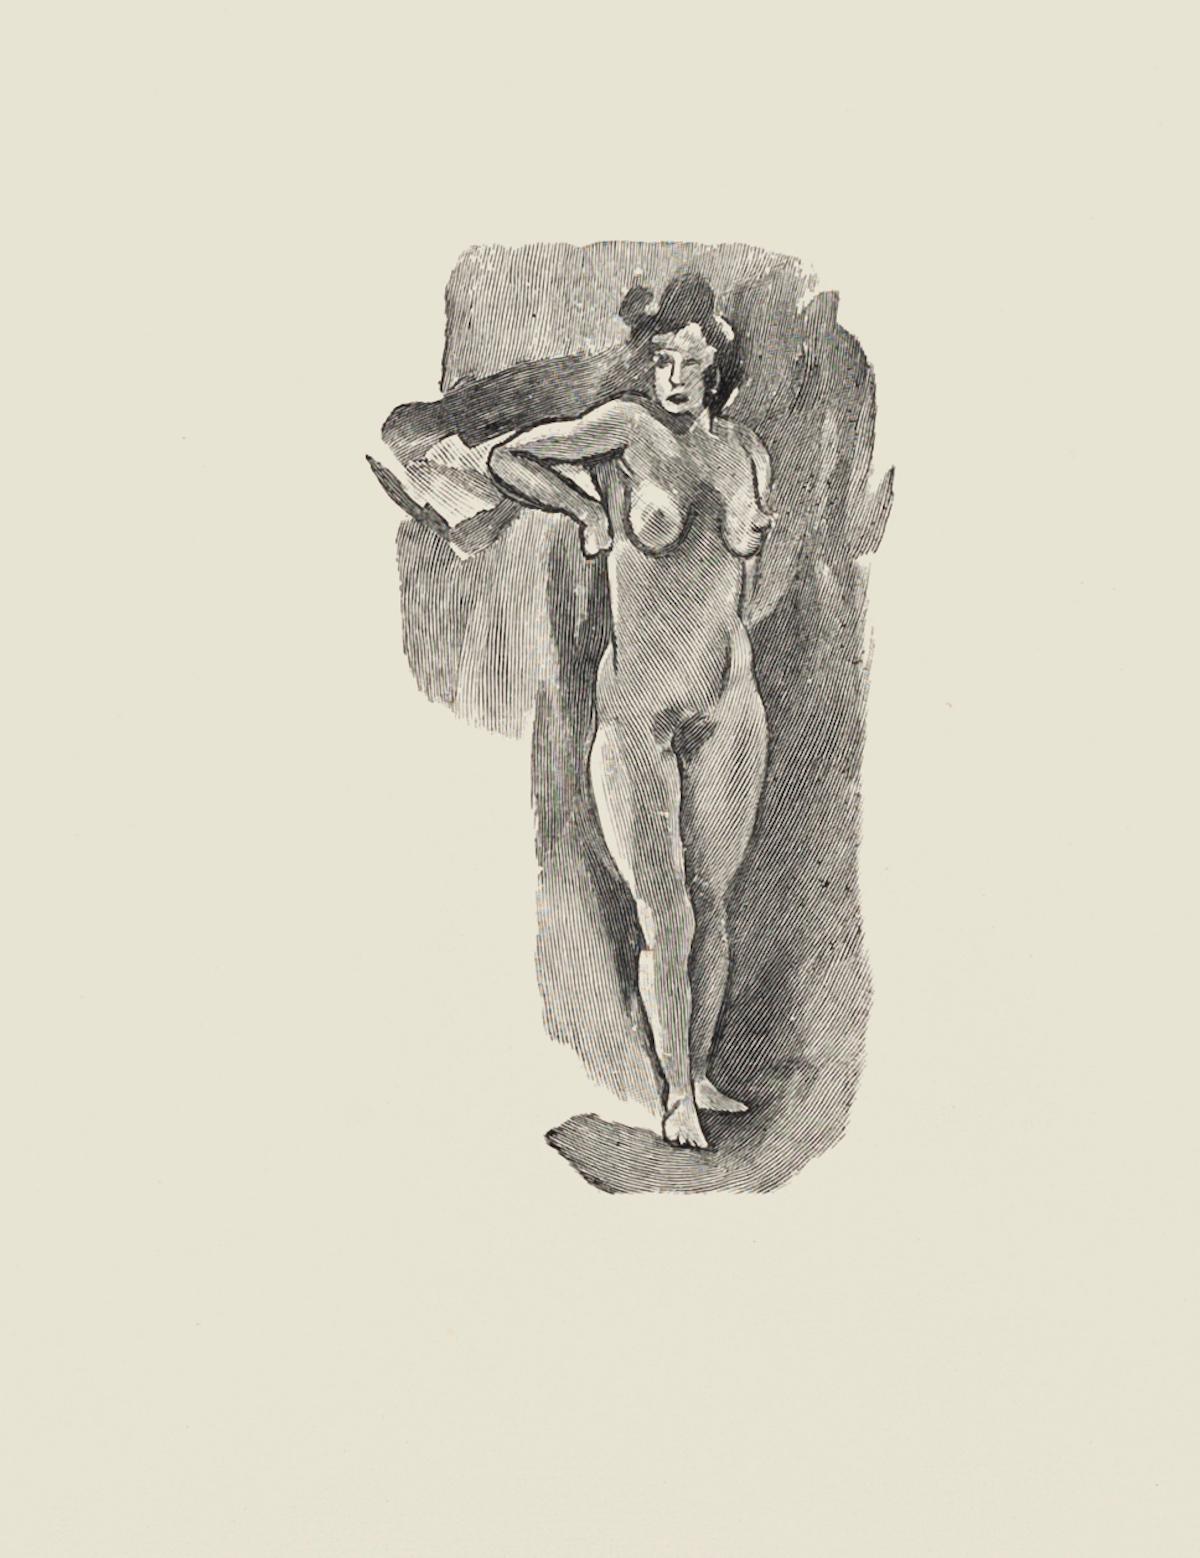 Nude is an original zincography artwork realized by Mino Maccari.

Included a white Passepartout: 49 x 34

The state of preservation is very good.

The artwork represents a nude standing woman, characterized by strong and confident strokes.

Mino